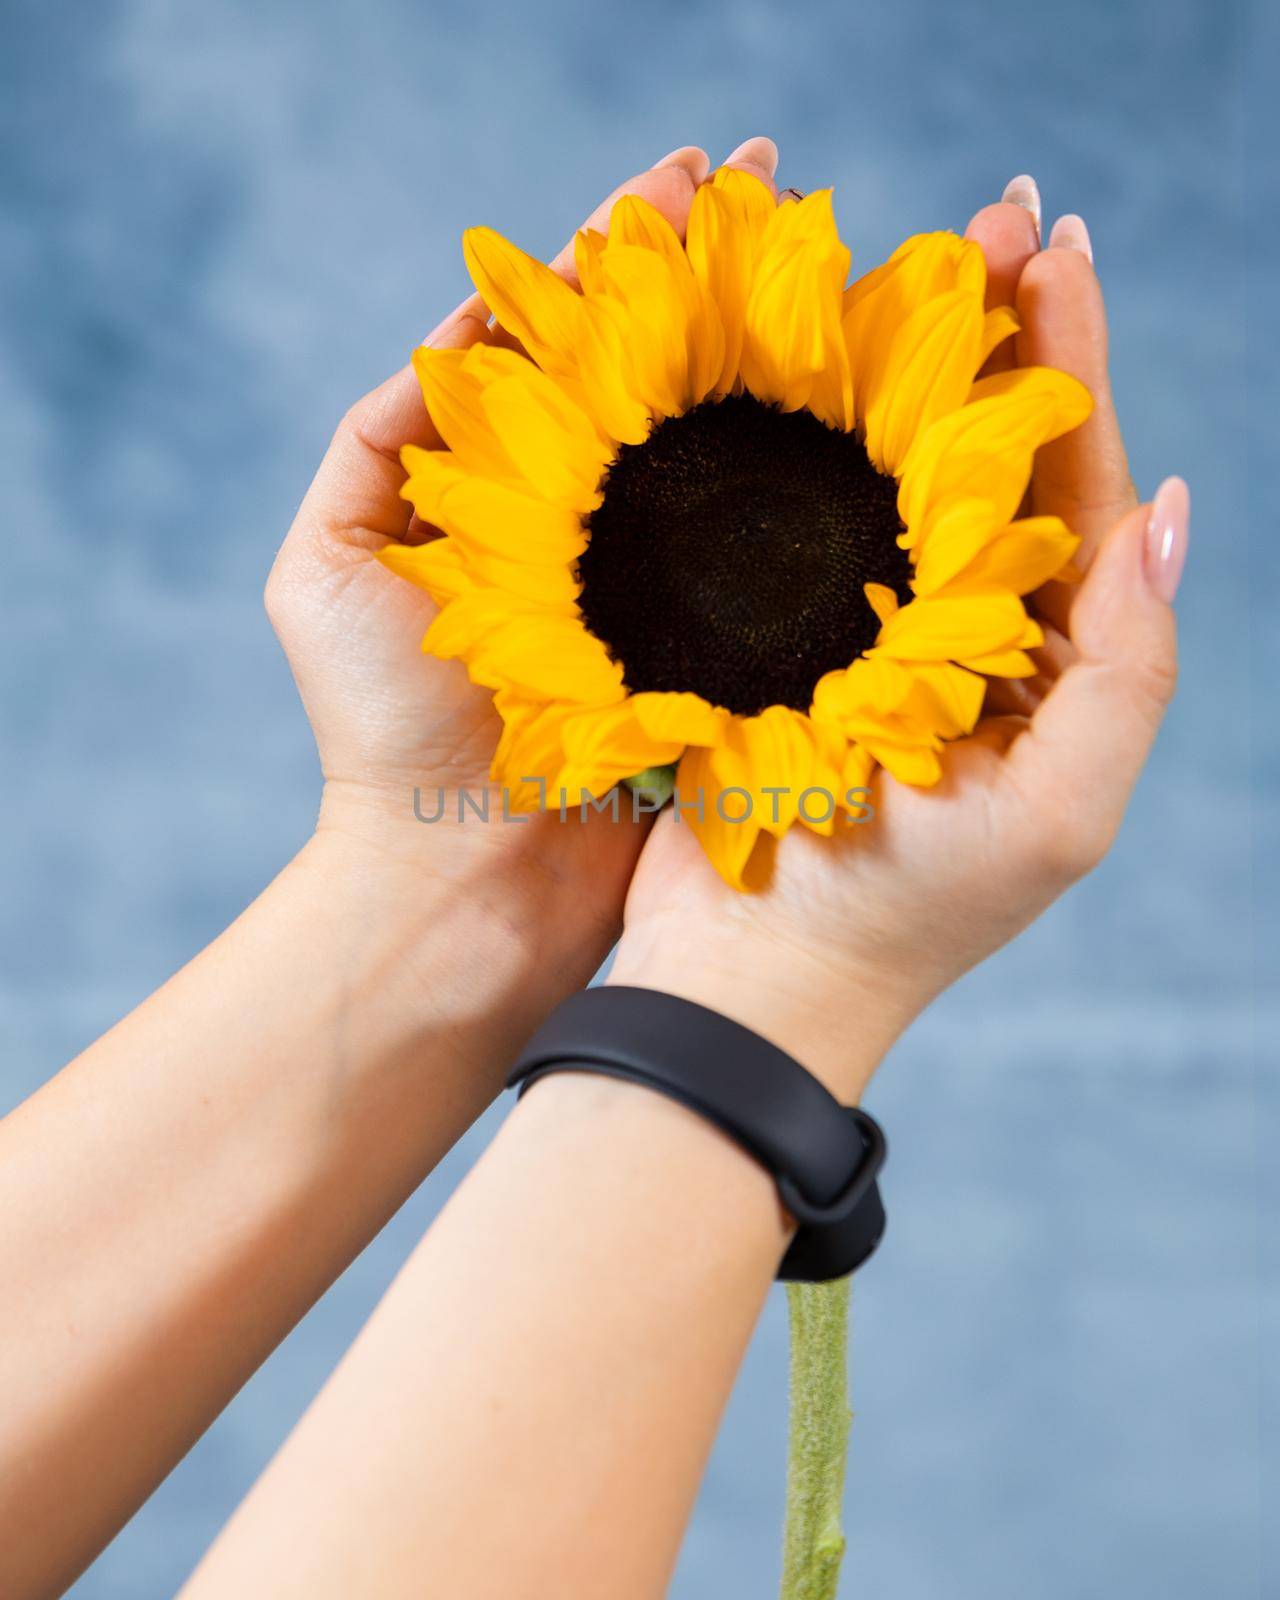 Woman holding single sunflower with blue background